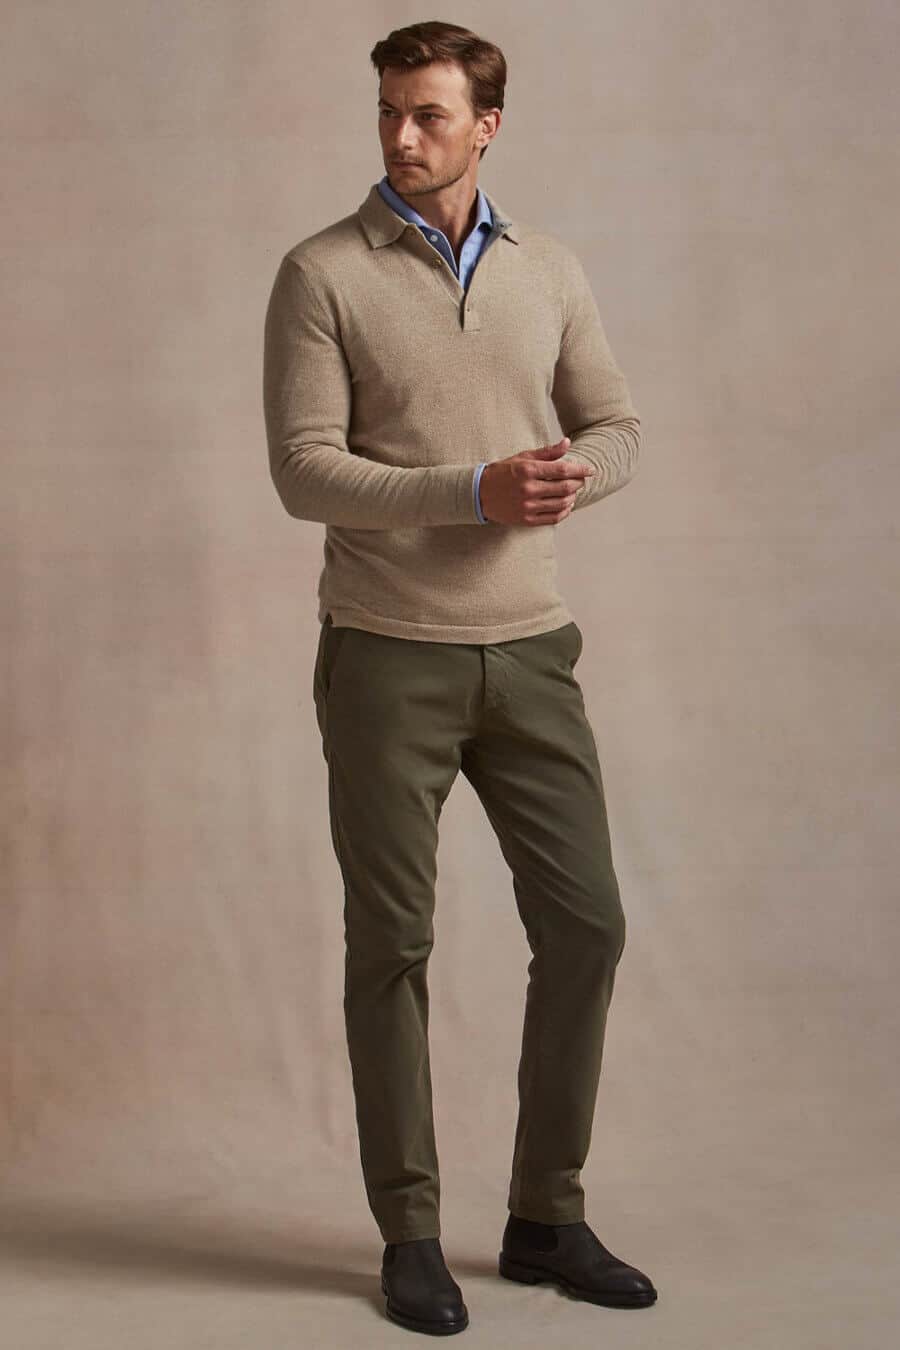 Men's olive chinos, zip neck sweater, blue shirt and chelsea boots outfit